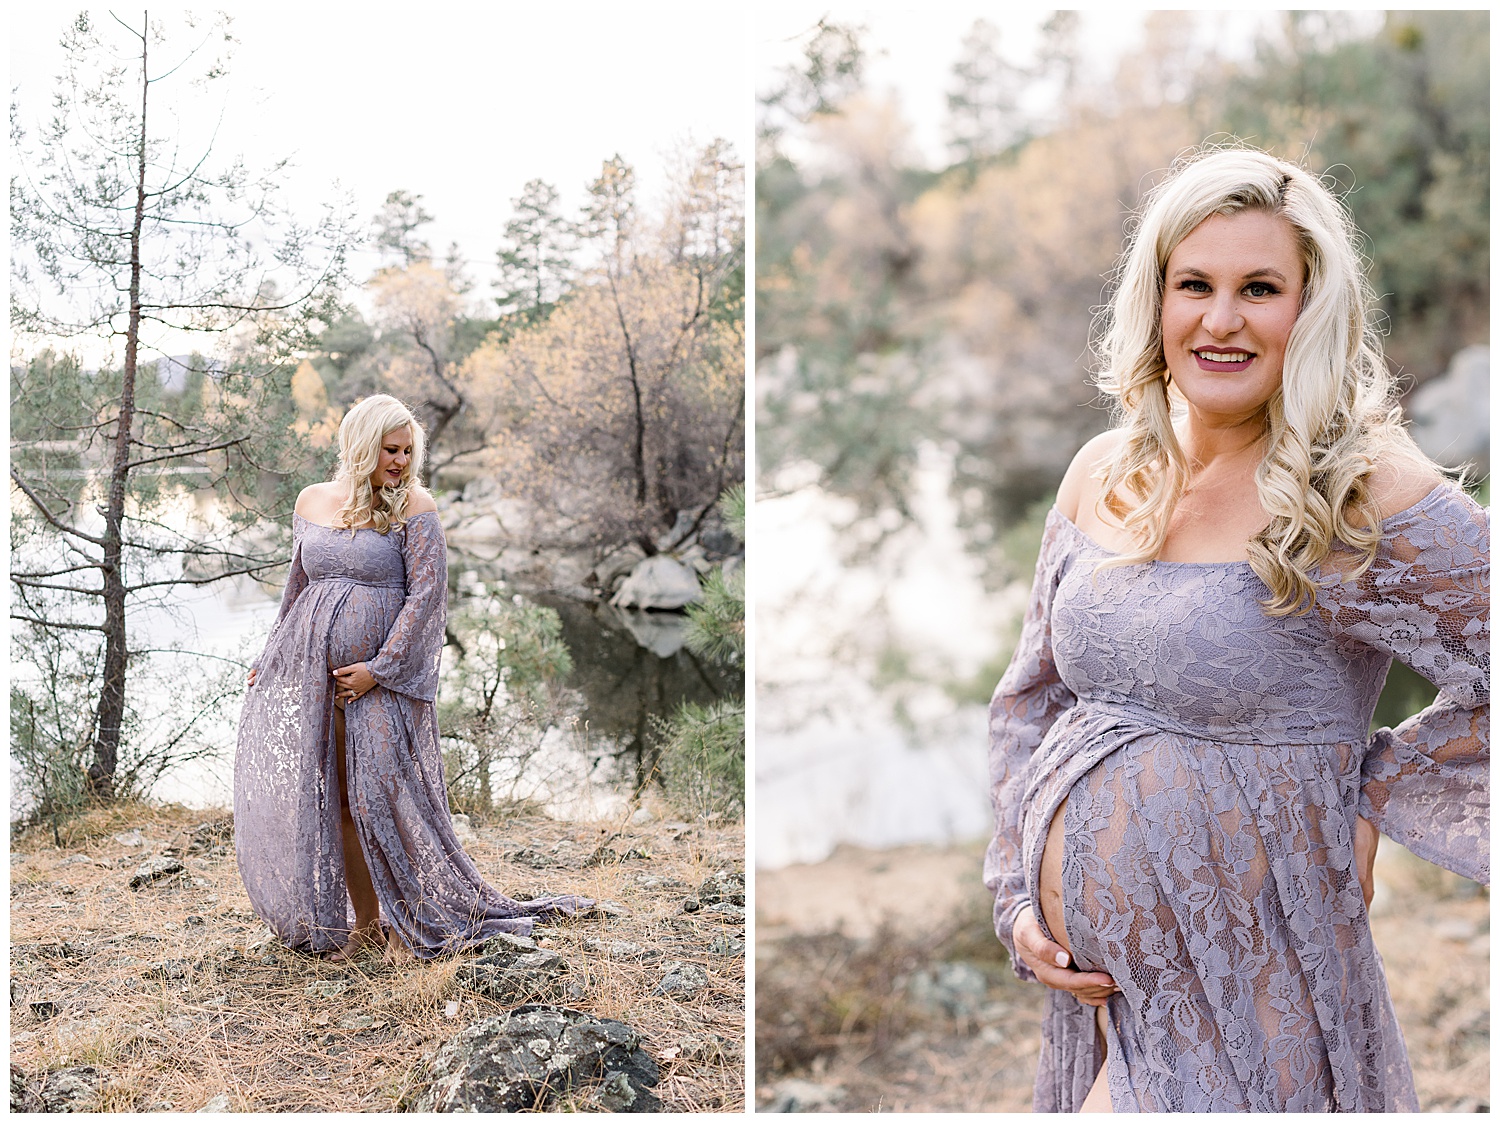 Maternity Session in Prescott Arizona, fall colors and purple lace gown